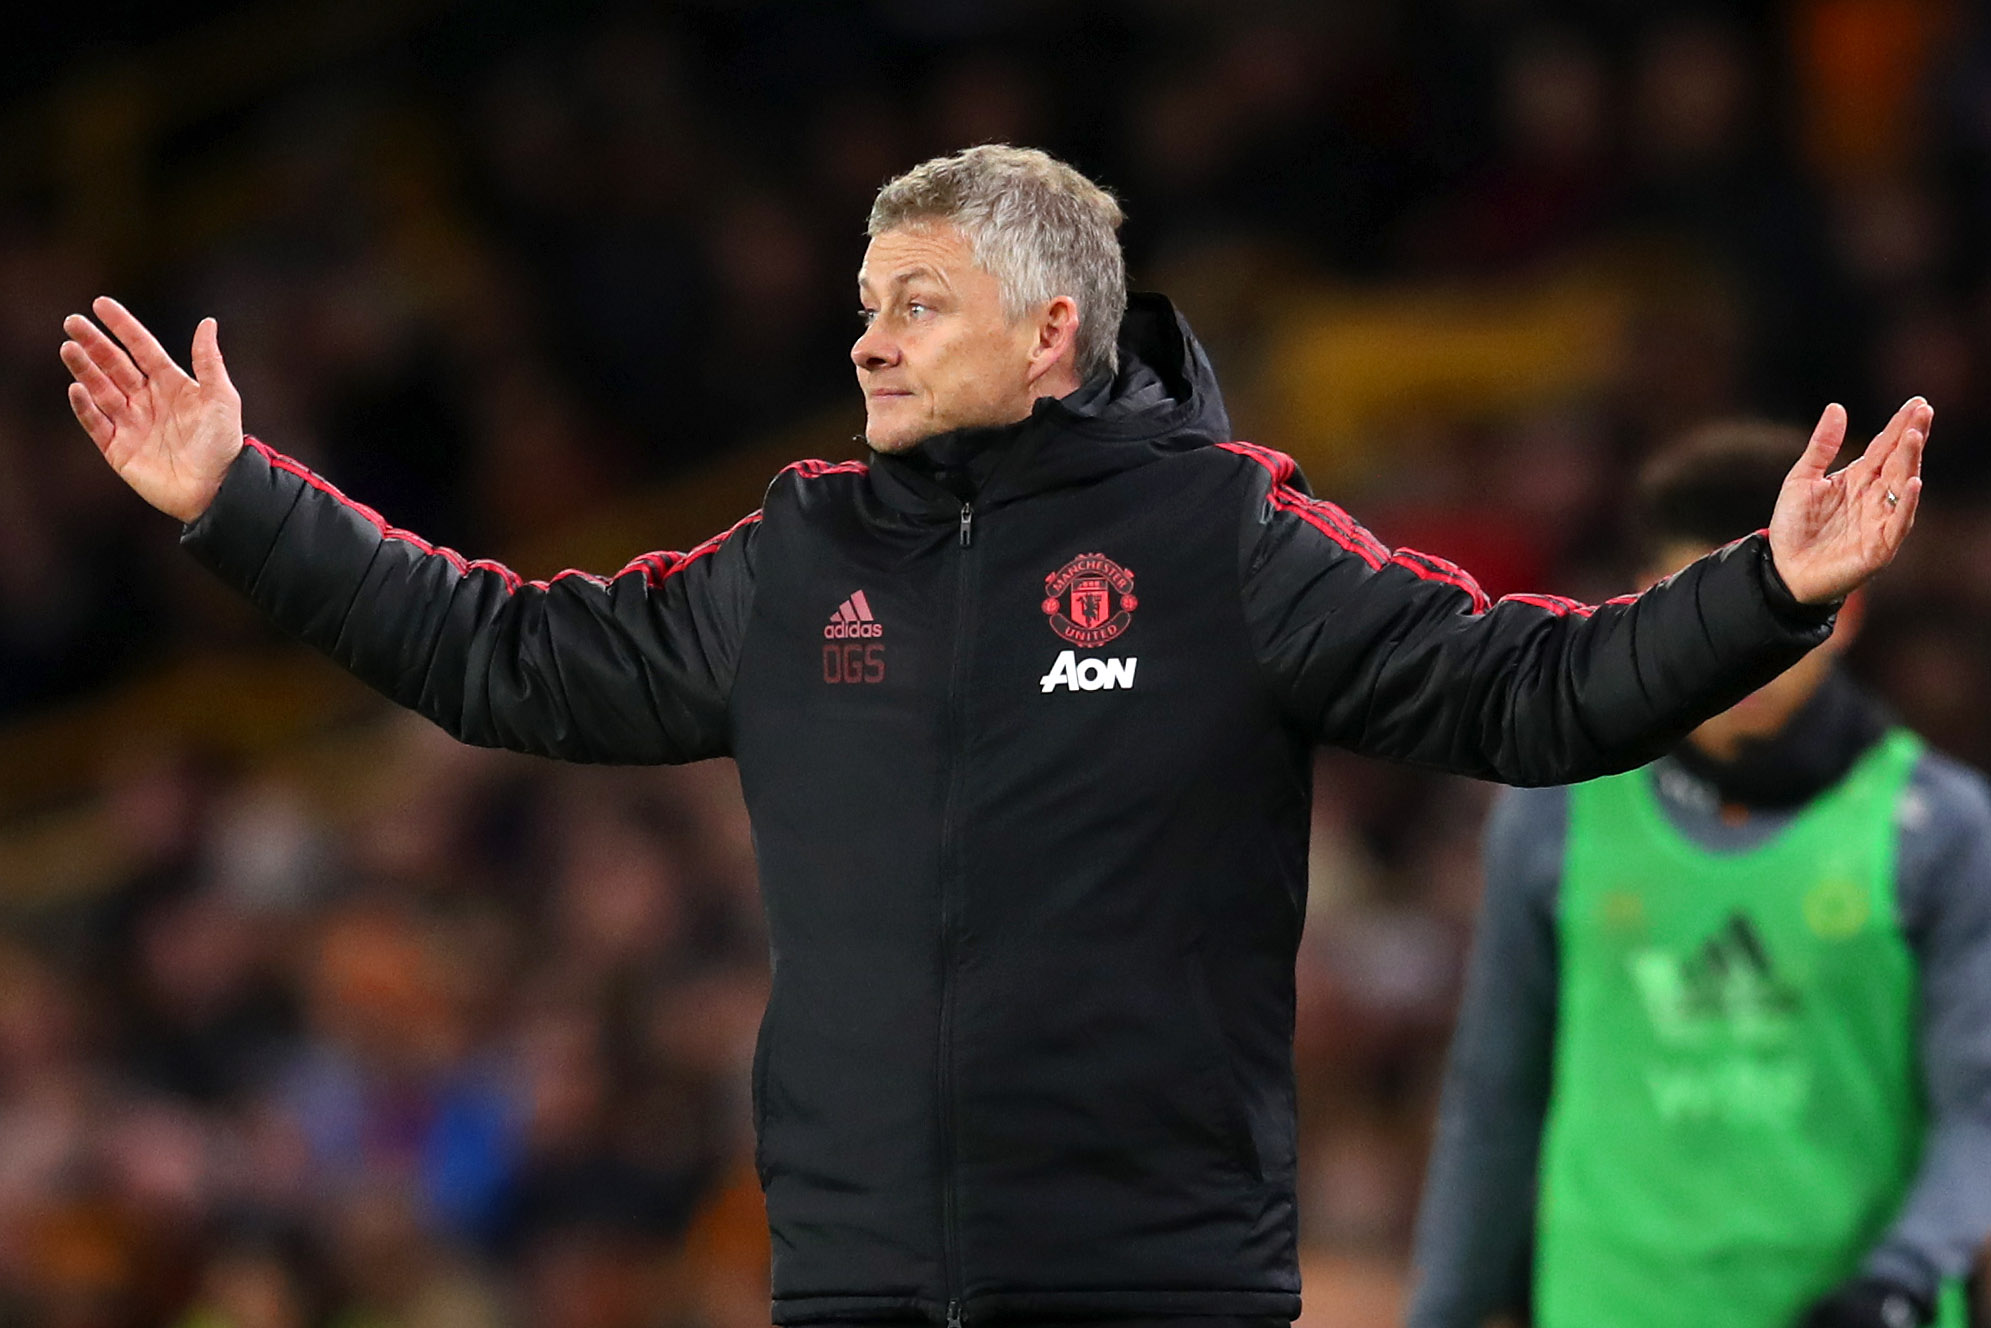 WOLVERHAMPTON, ENGLAND - MARCH 16: Ole Gunnar Solskjaer, Interim Manager of Manchester United gives his team instructions during the FA Cup Quarter Final match between Wolverhampton Wanderers and Manchester United at Molineux on March 16, 2019 in Wolverhampton, England. (Photo by Catherine Ivill/Getty Images)